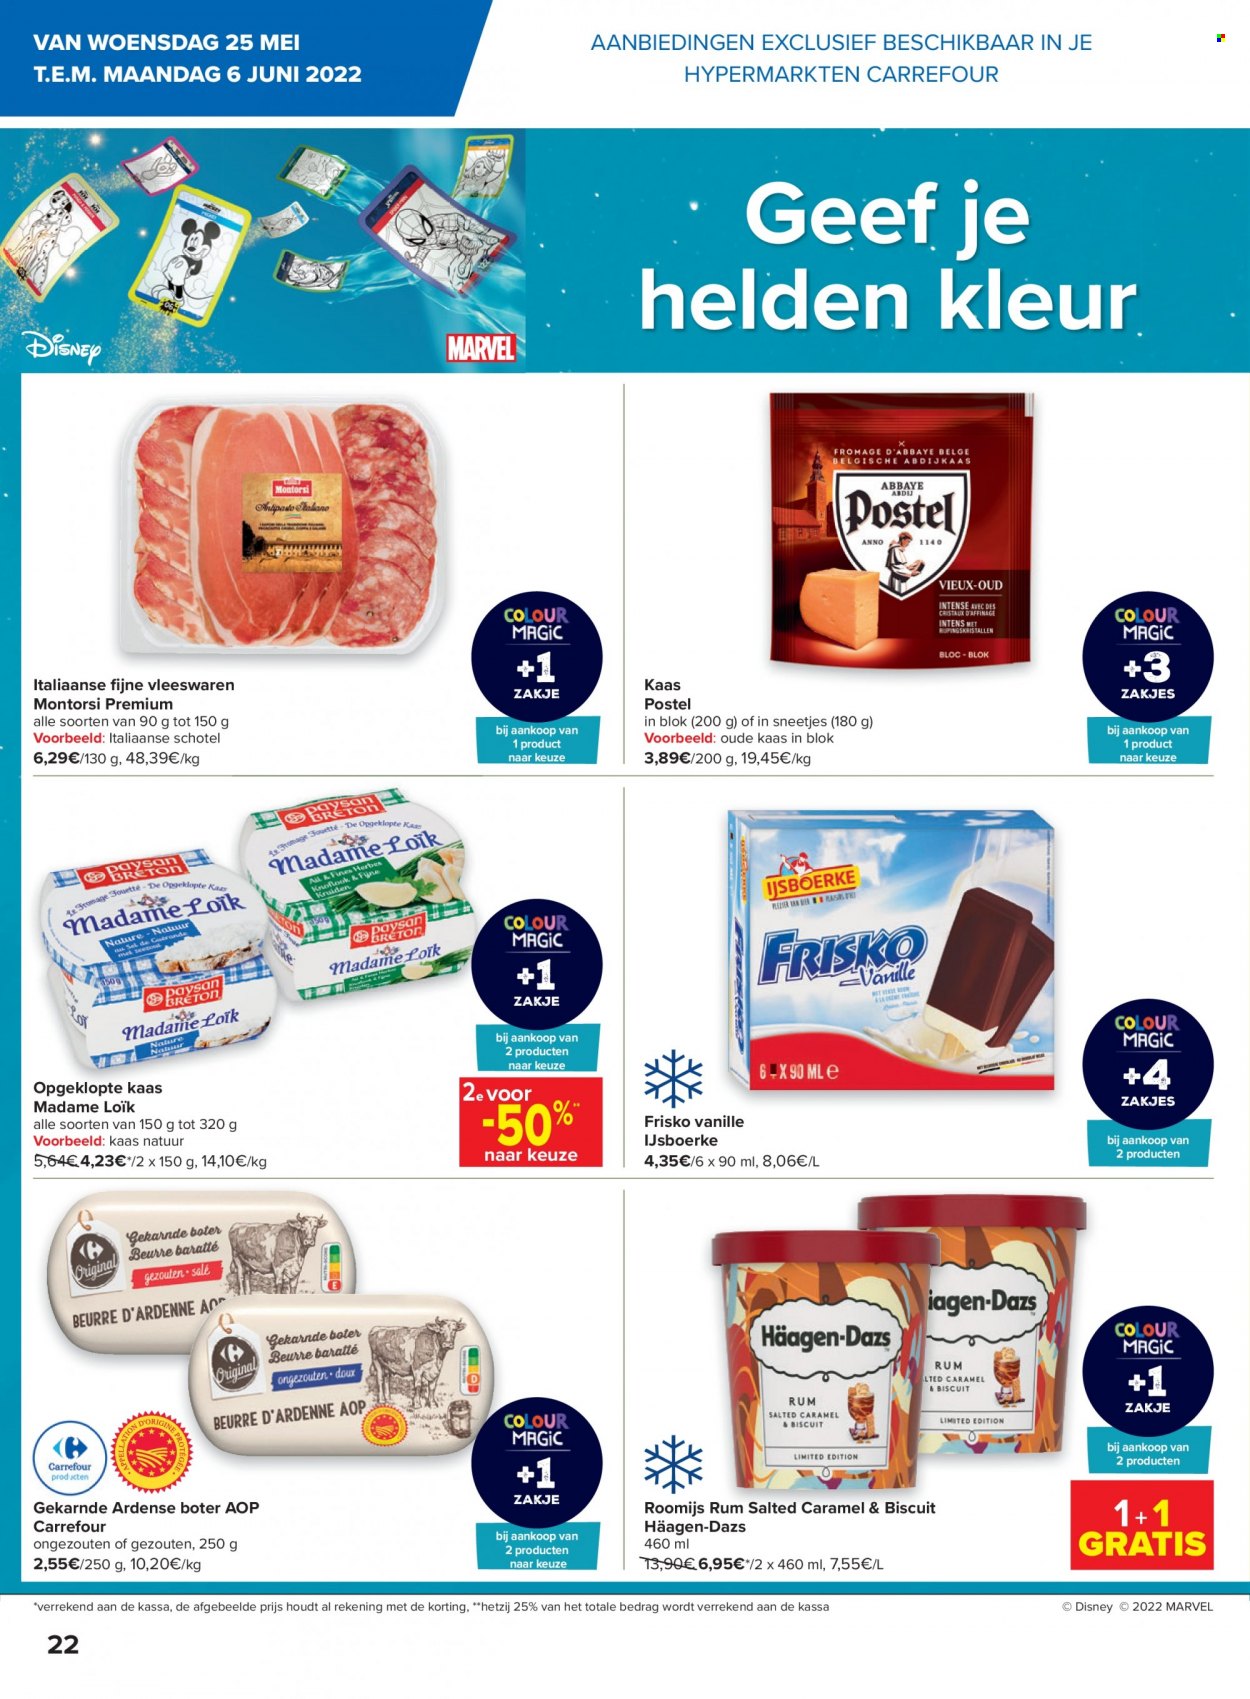 Catalogue Carrefour hypermarkt - 24.5.2022 - 30.5.2022. Page 22.